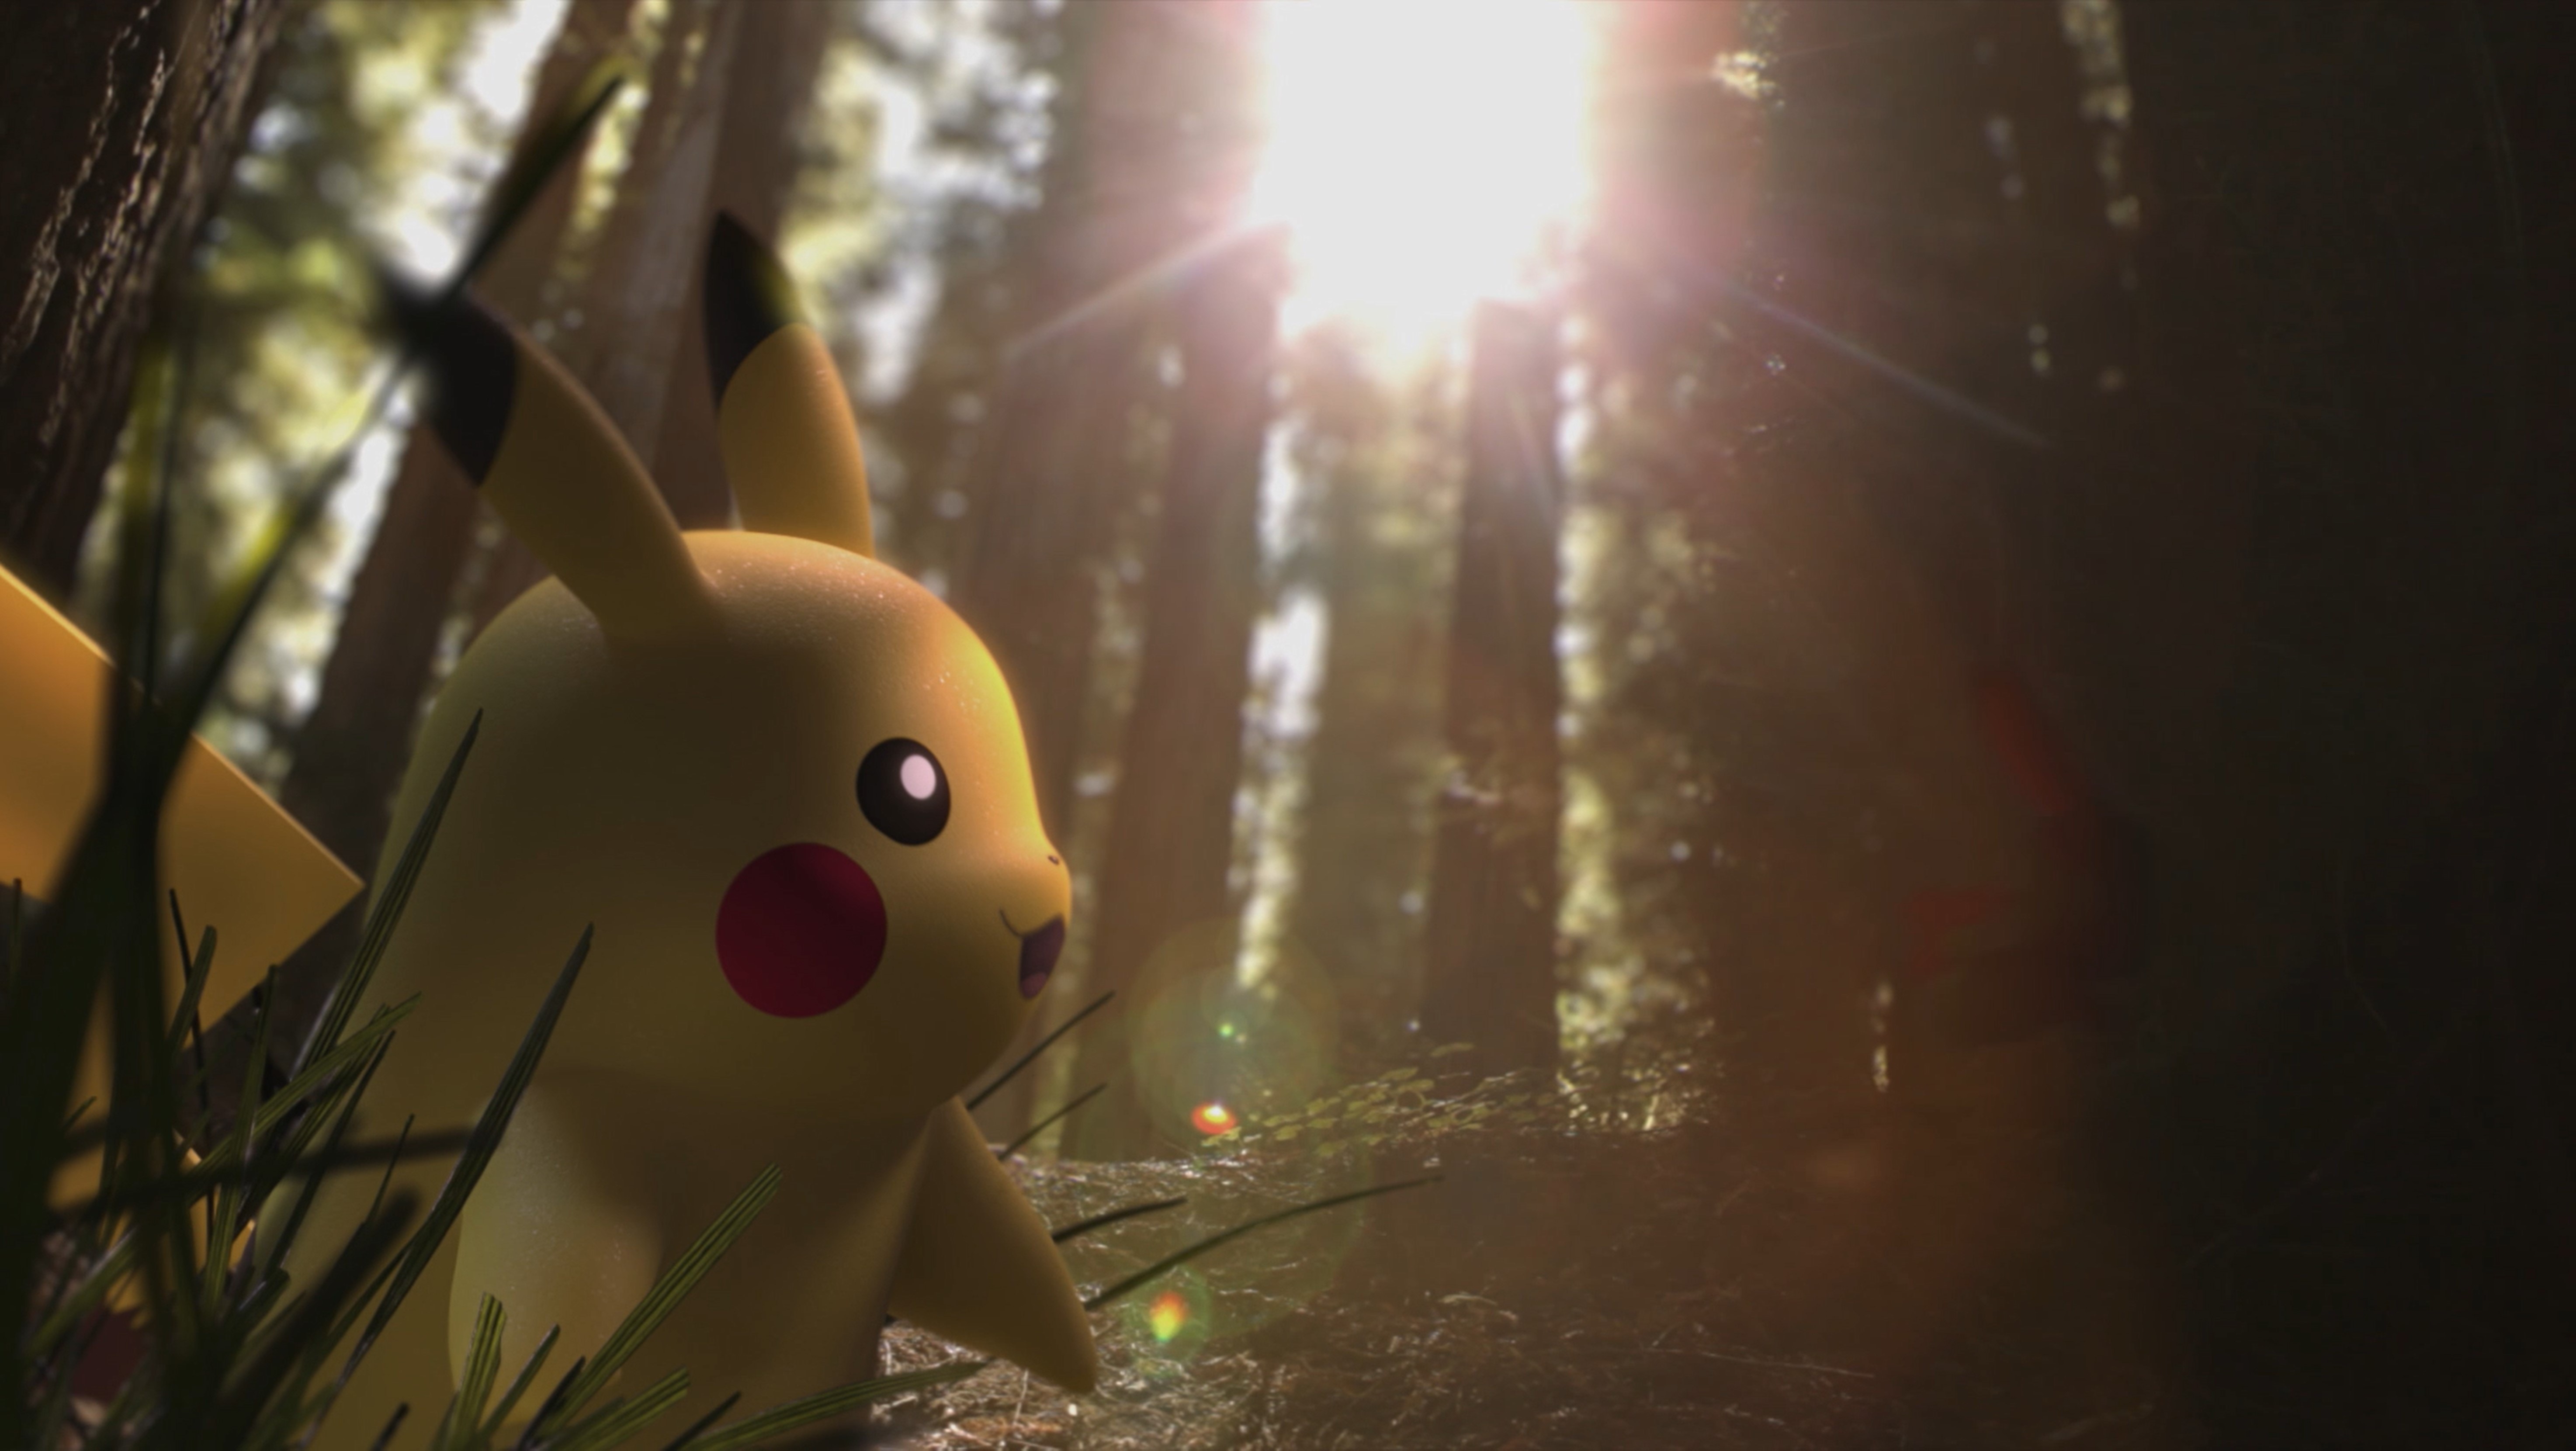 Pikachu In Forest, HD Cartoons, 4k Wallpaper, Image, Background, Photo and Picture